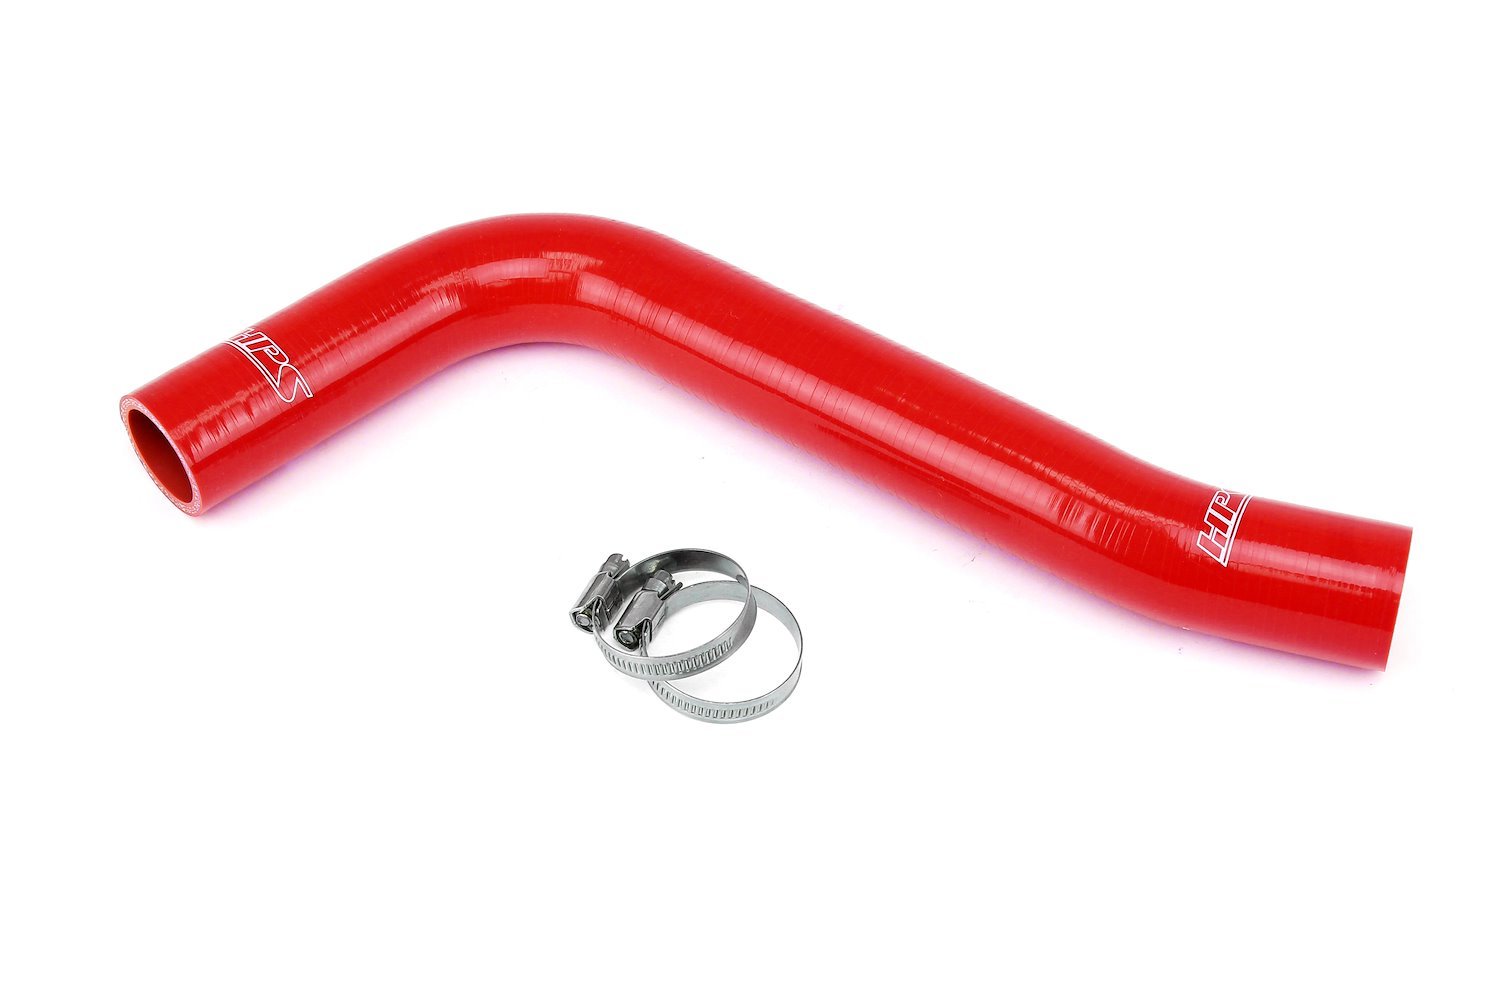 57-1885-RED Radiator Hose Kit, 3-Ply Reinforced Silicone, Replaces Lower Rubber Radiator Coolant Hose.